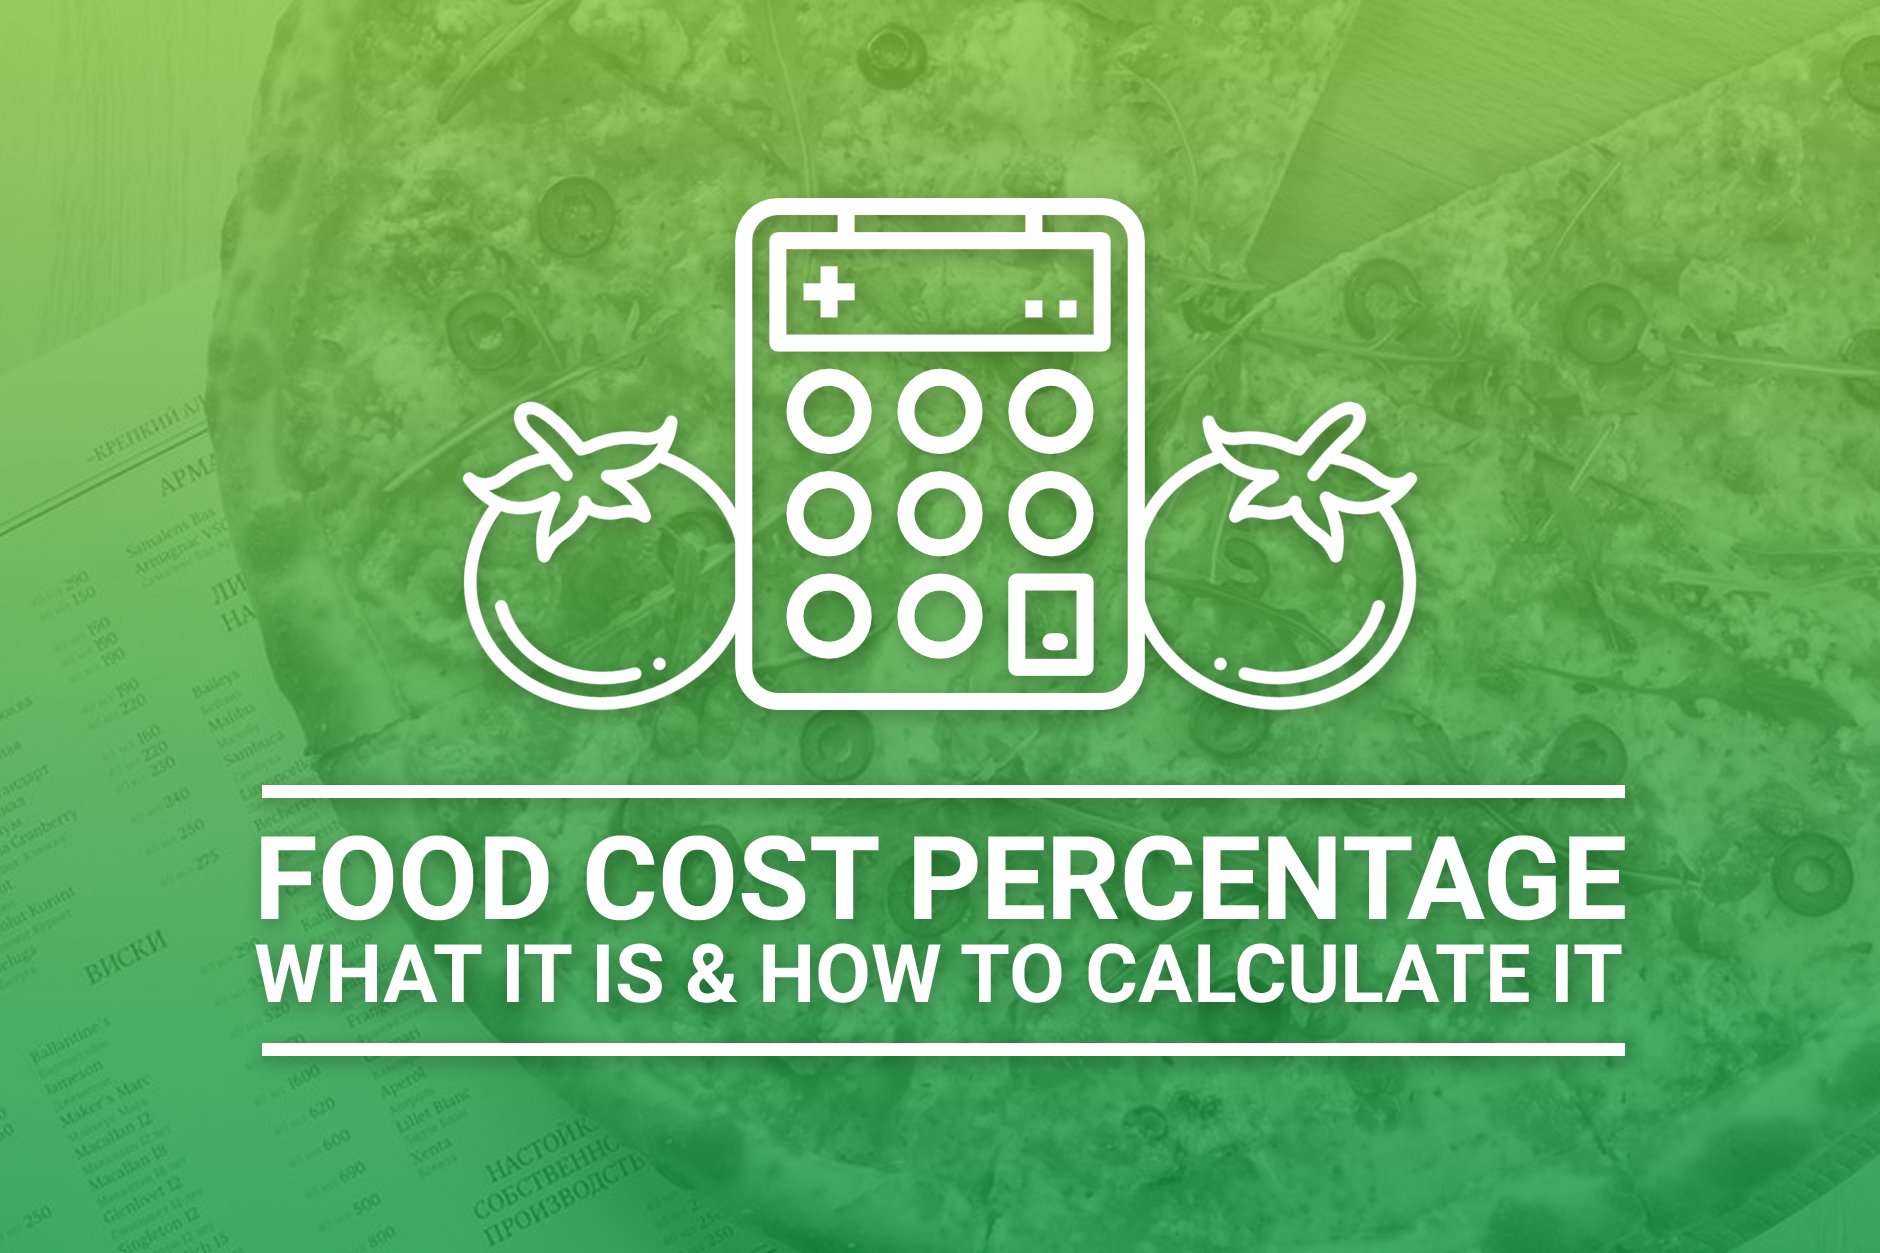 More information about "How to calculate GP from food cost"